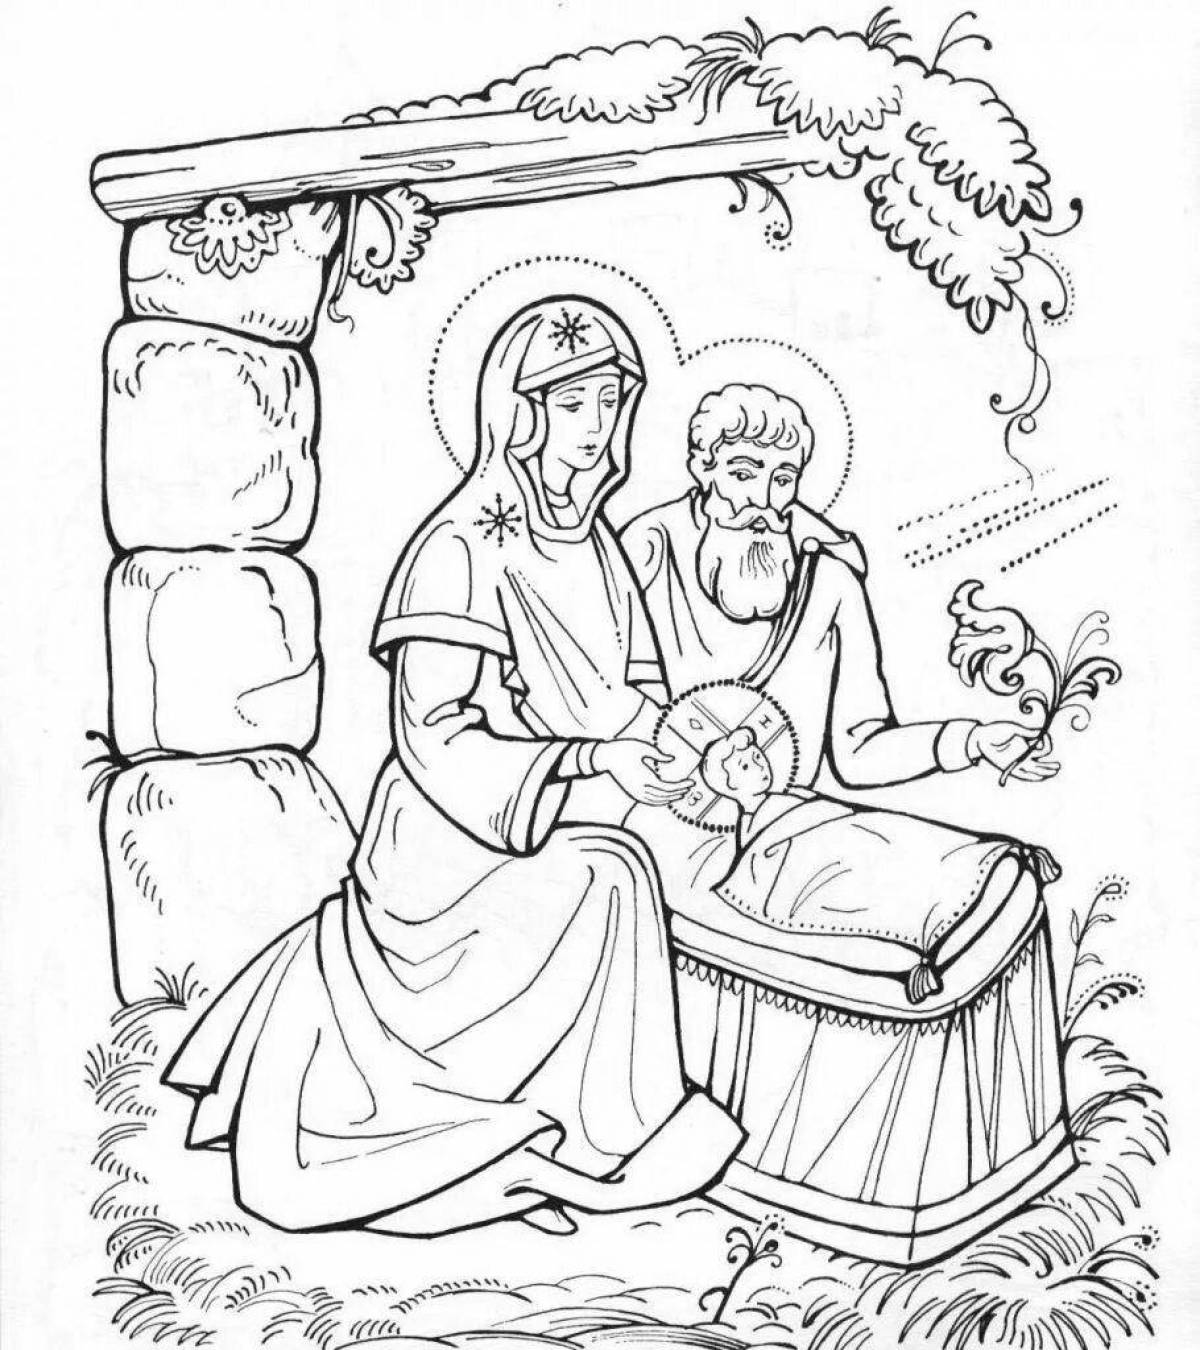 Adorable Christmas story coloring book